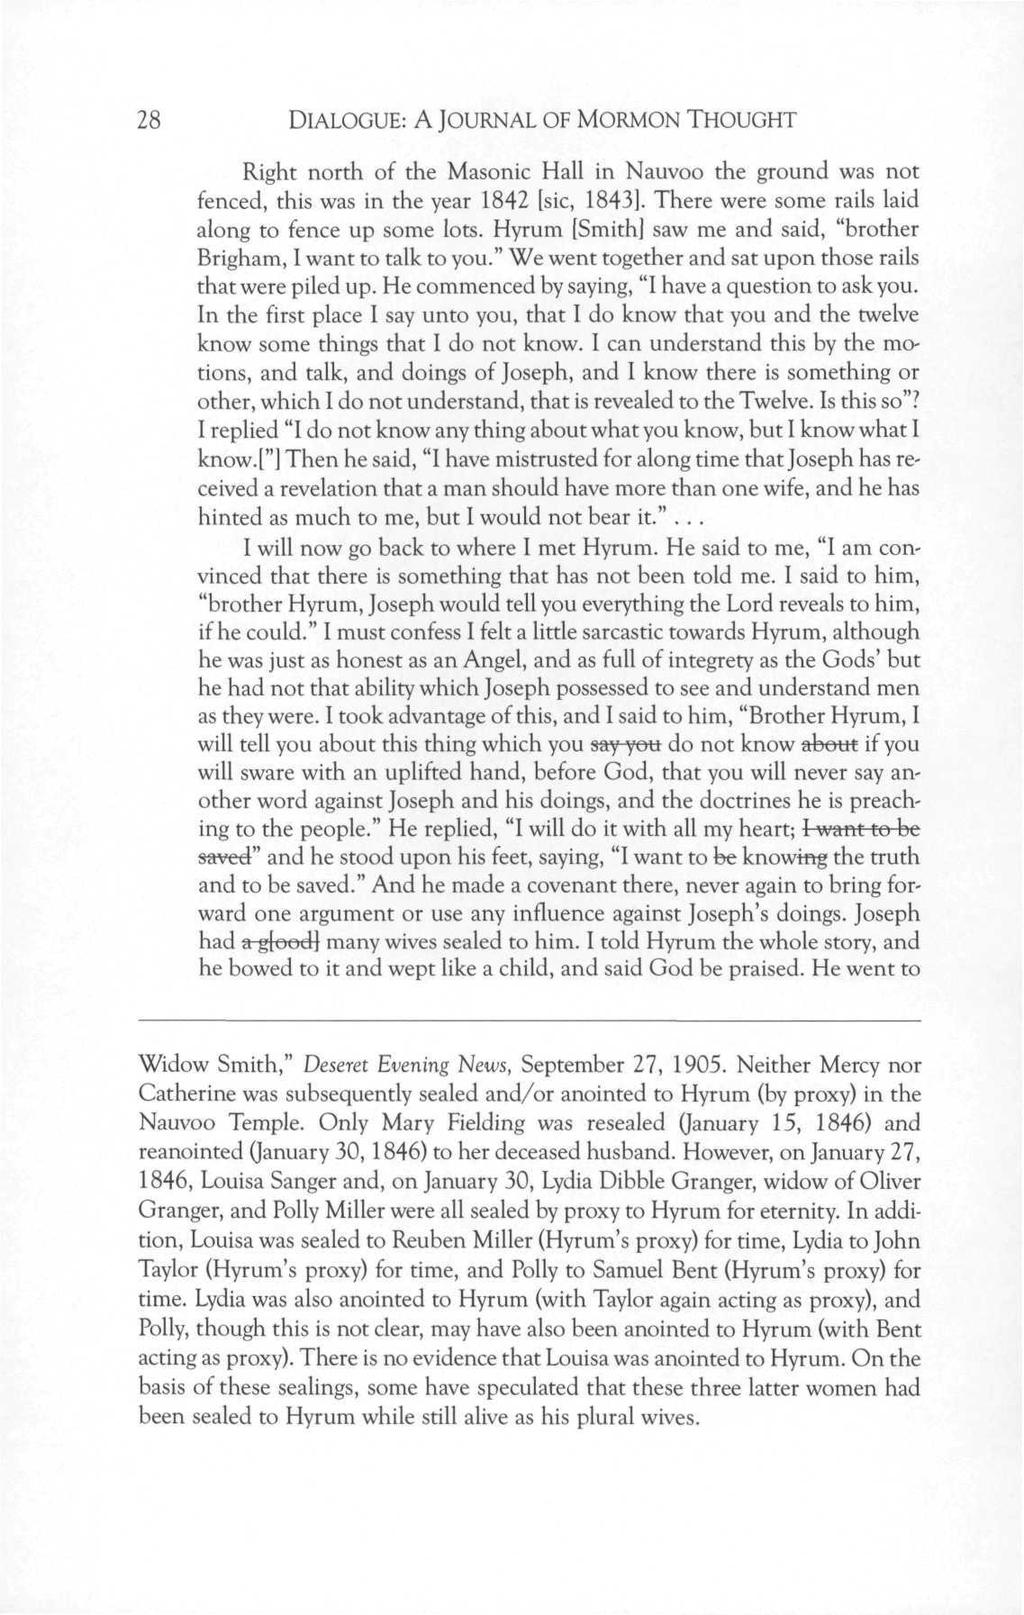 28 DIALOGUE: A JOURNAL OF MORMON THOUGHT Right north of the Masonic Hall in Nauvoo the ground was not fenced, this was in the year 1842 [sic, 1843].